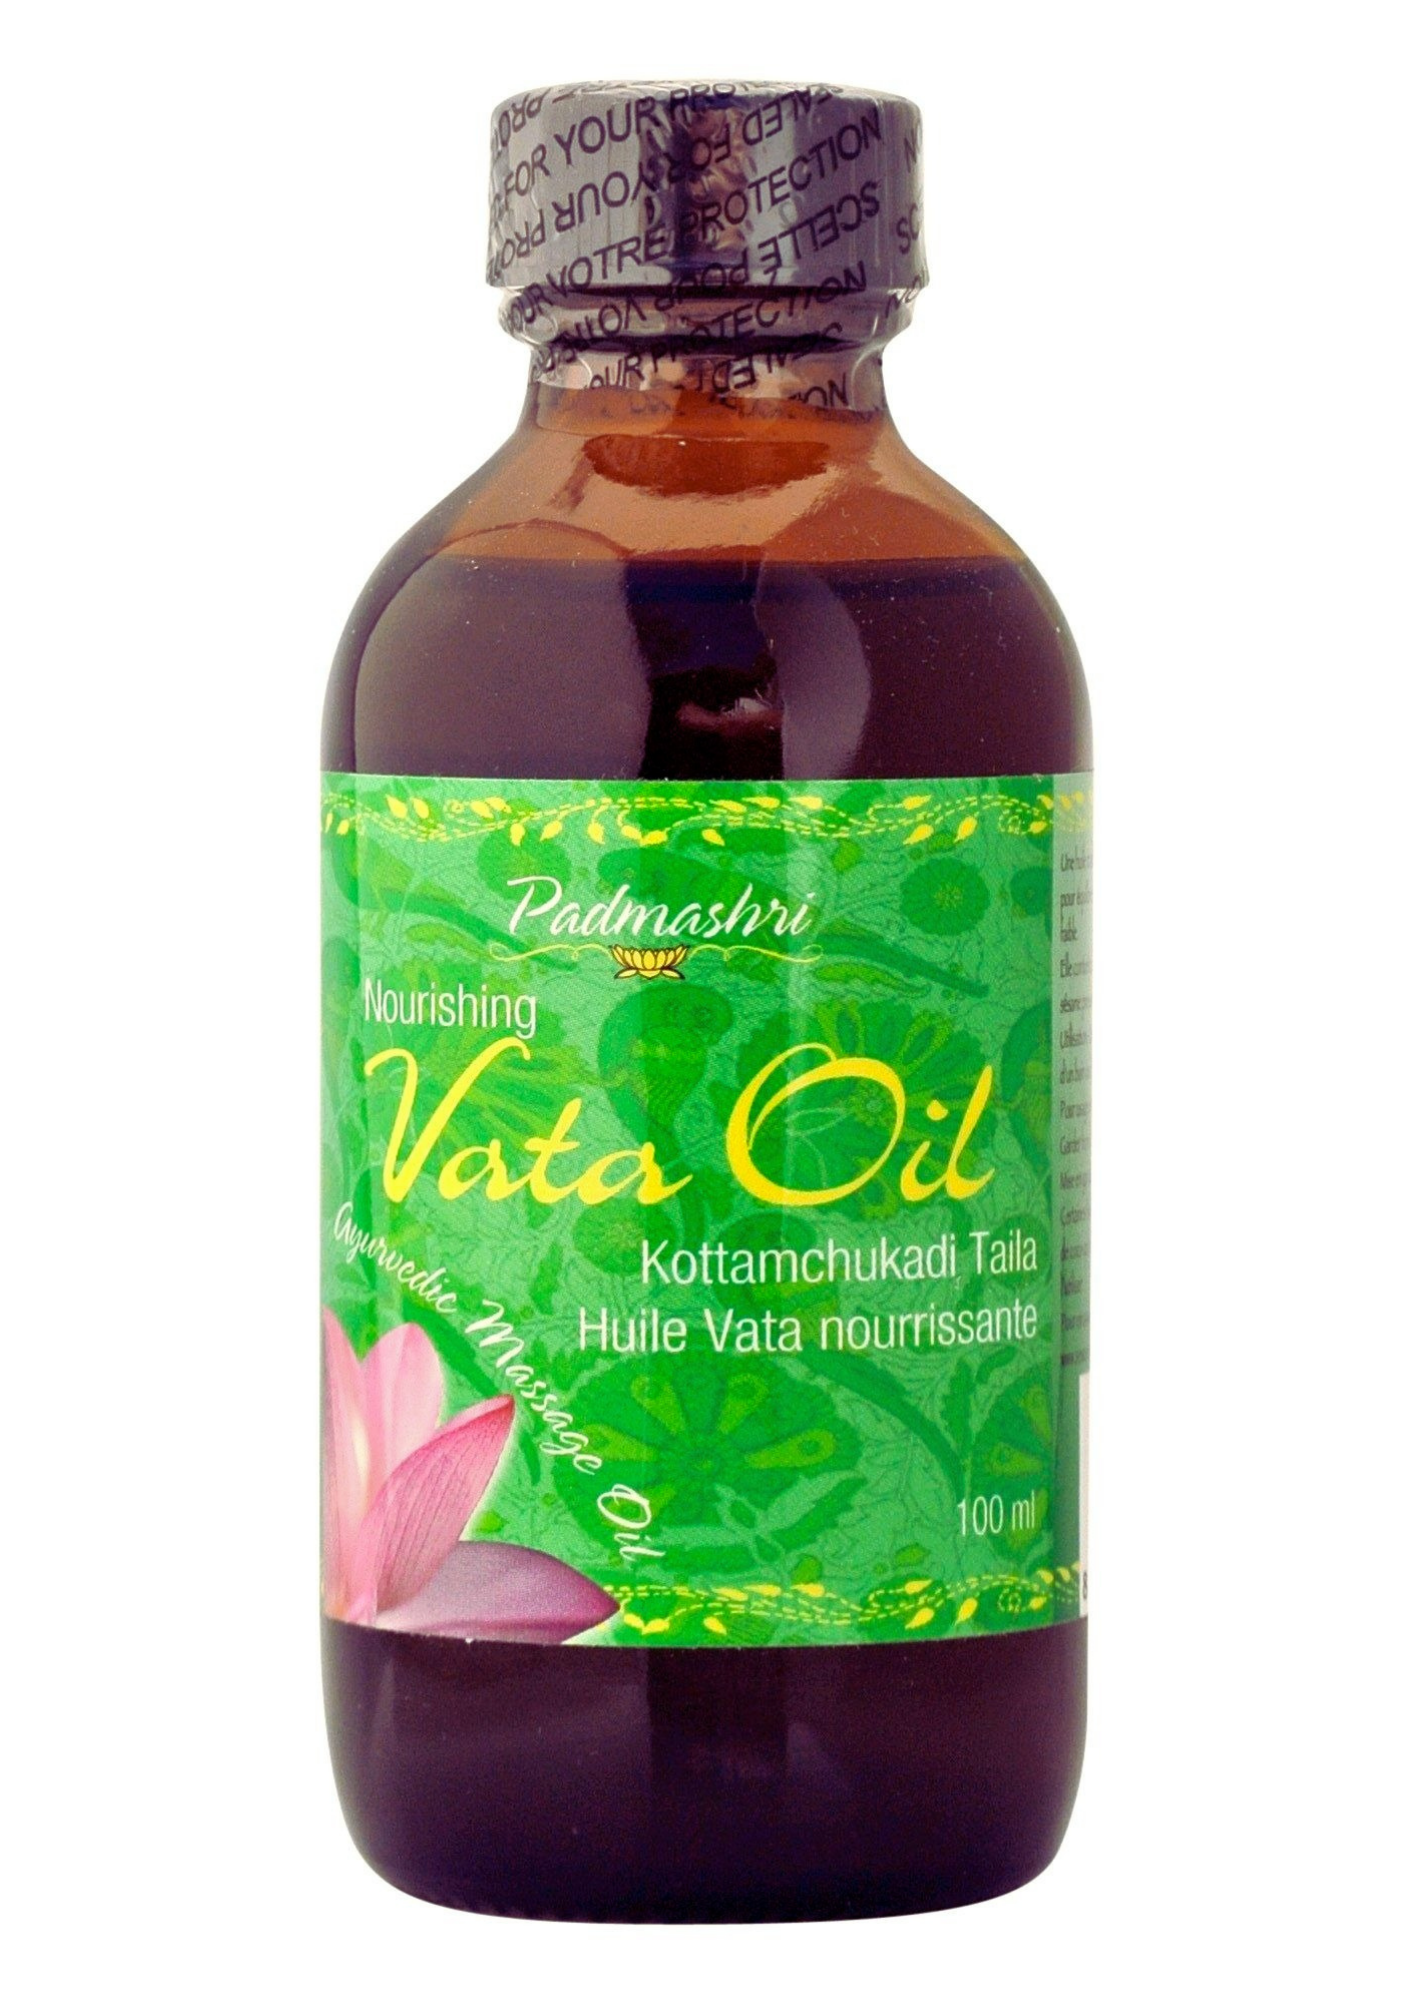 Ayurvedic Nourishing Vata Massage Oil- Suitable for professional use in wellness clinics as well as self-care. It provides essential nourishment and moisture to the skin. Eco-friendly, cruelty-free, and not tested on animals. Absorbs quickly to lock in moisture for superior hydration. Small quantities of these oils deliver undiluted nourishment.